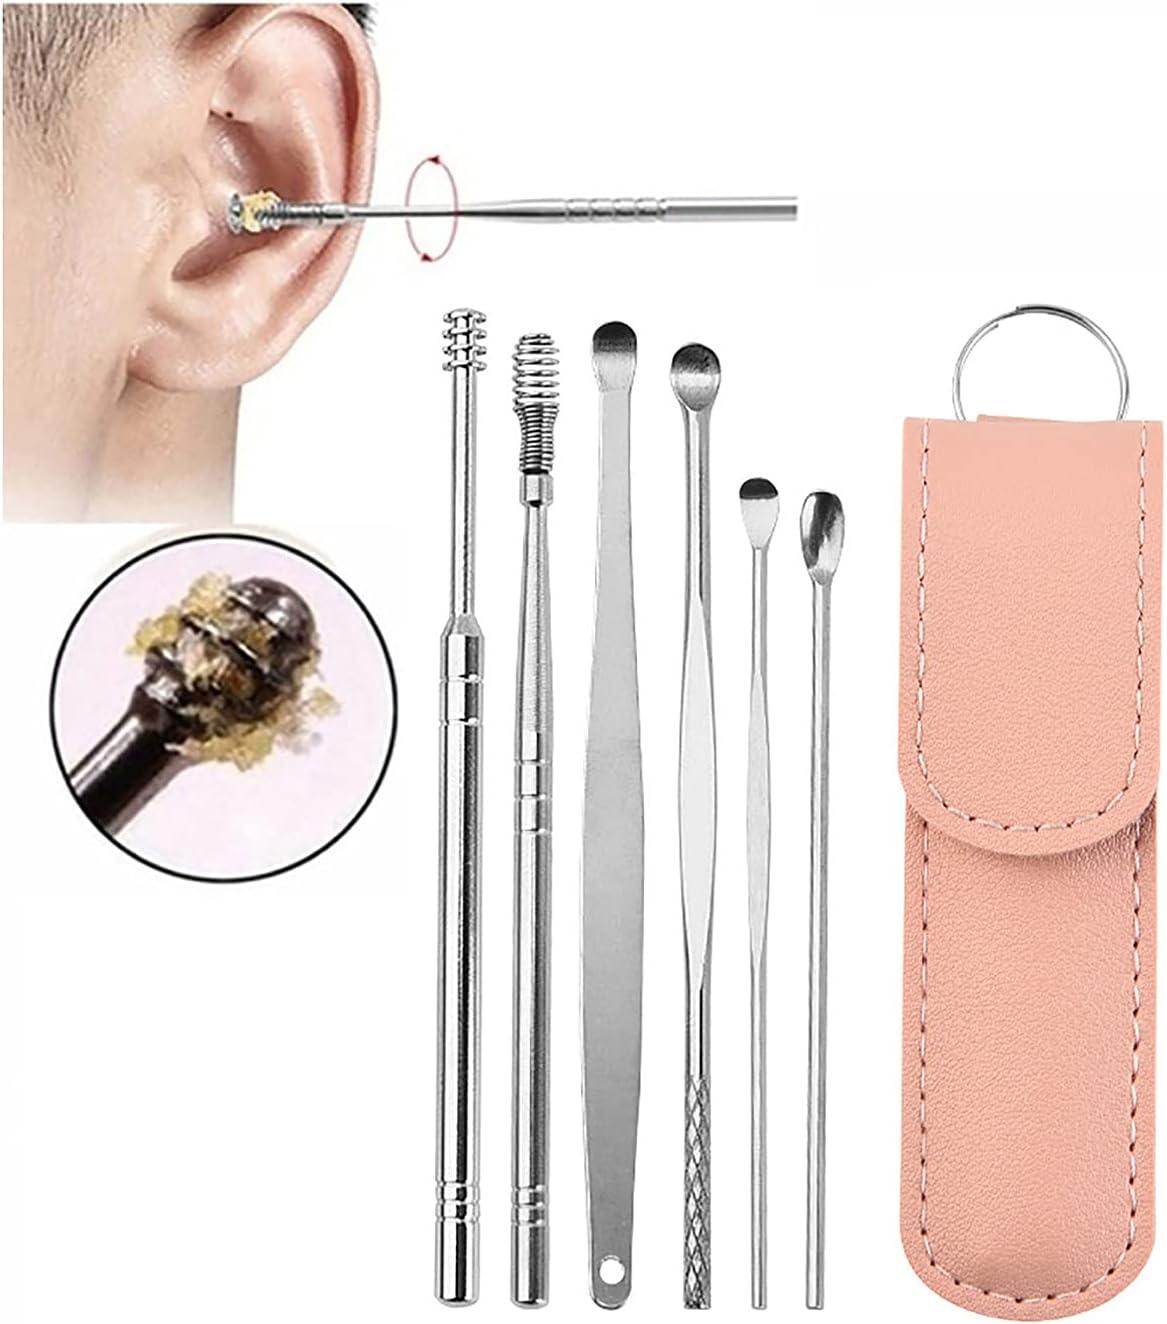 Stainless Steel Ear Wax Remover Ear Cleaner Set Ear Wax Removal Tool  6Pcs/set